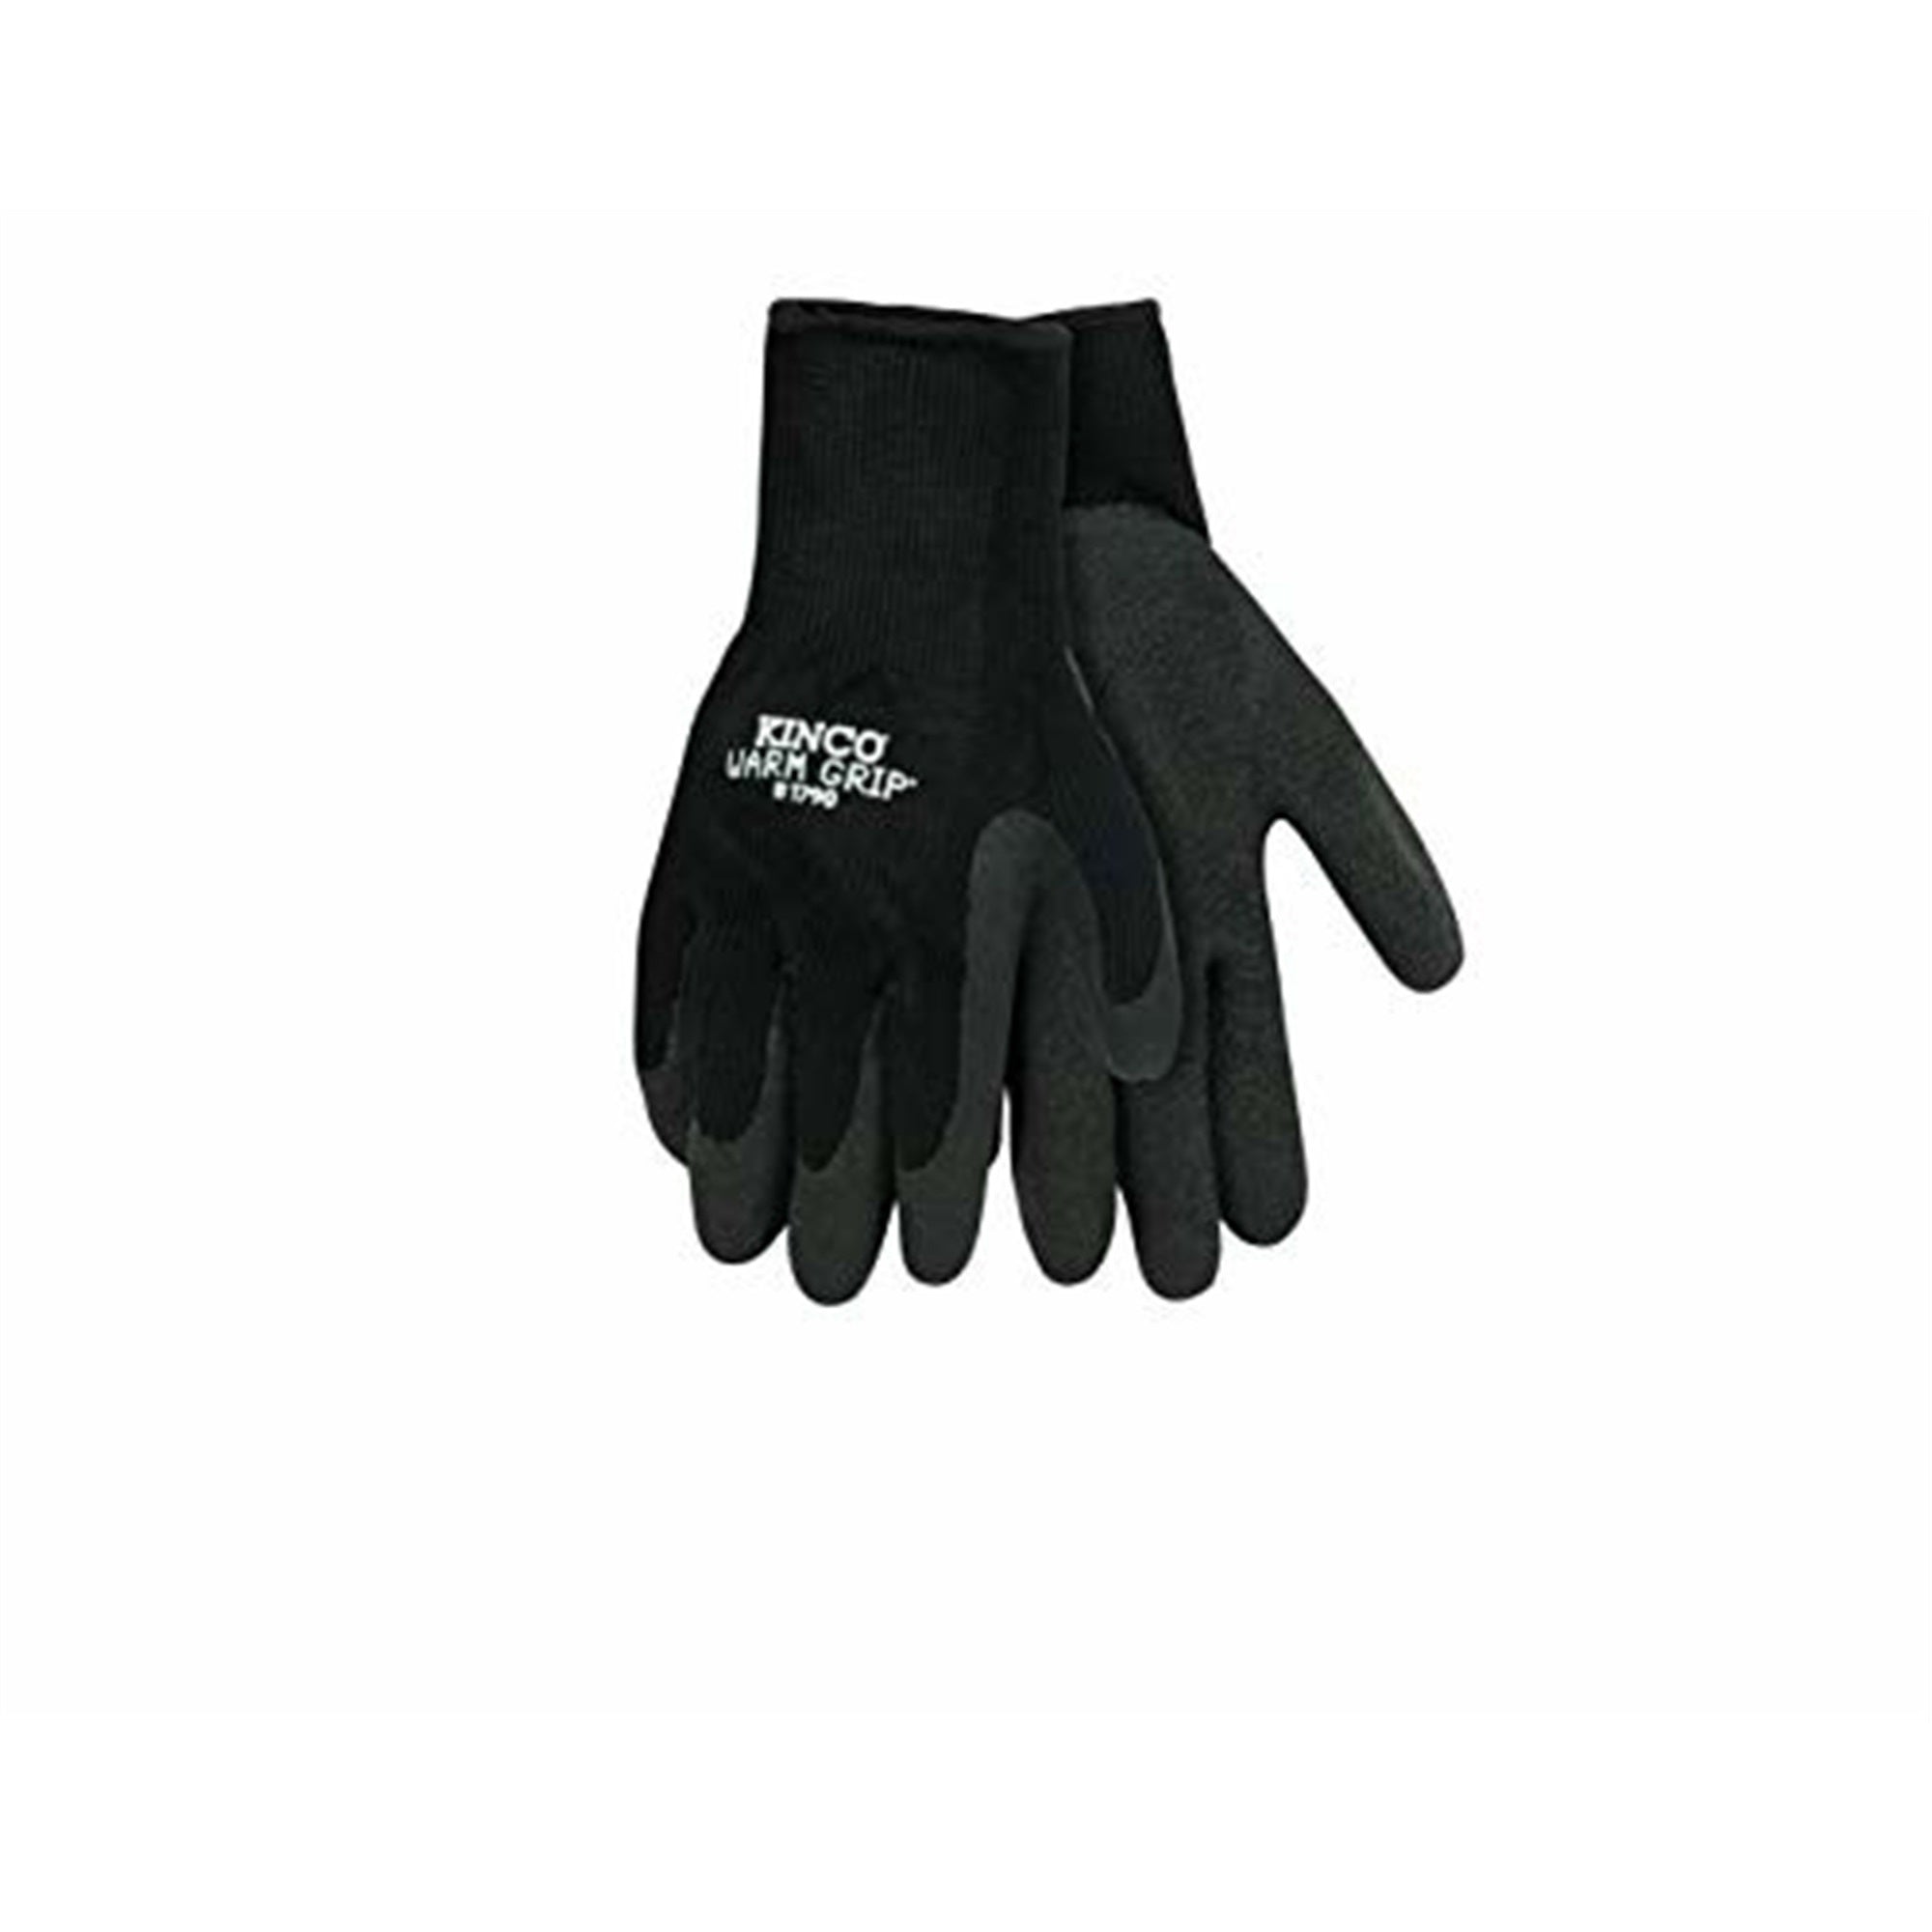 Kinco Warm Grip Thermal Knit Shell with Latex Palm, Black, Size Large